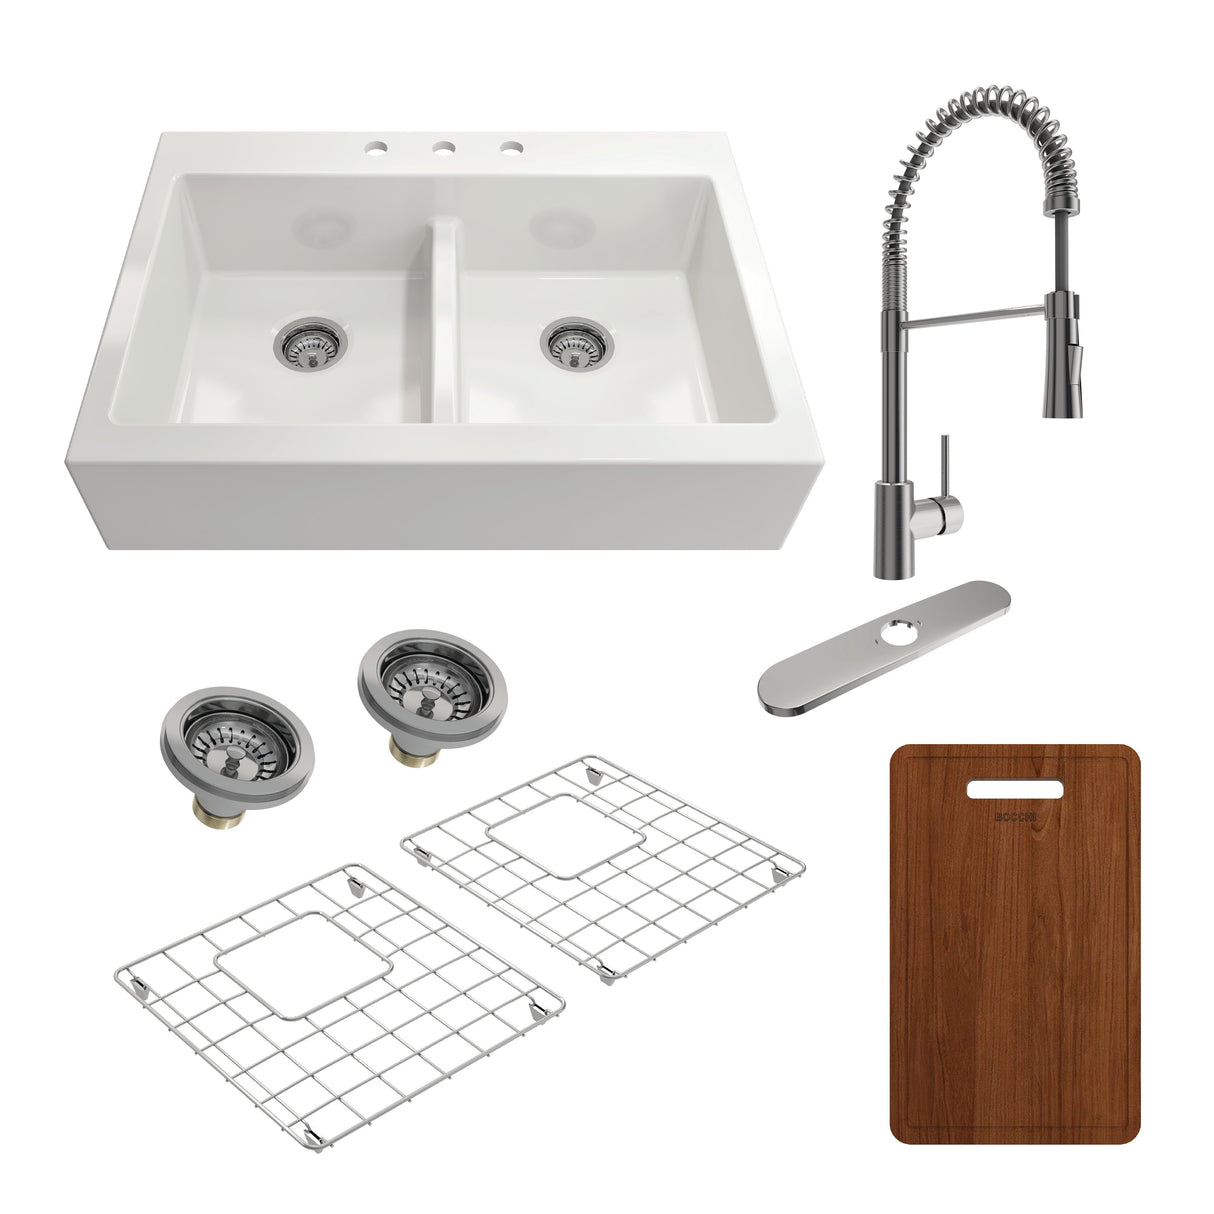 BOCCHI 1501-001-2020SS Kit: 1501 Nuova Apron Front Drop-In Fireclay 34 in. 50/50 Double Bowl Kitchen Sink with Protective Bottom Grids and Strainers & Cutting Board w/ Livenza 2.0 Faucet